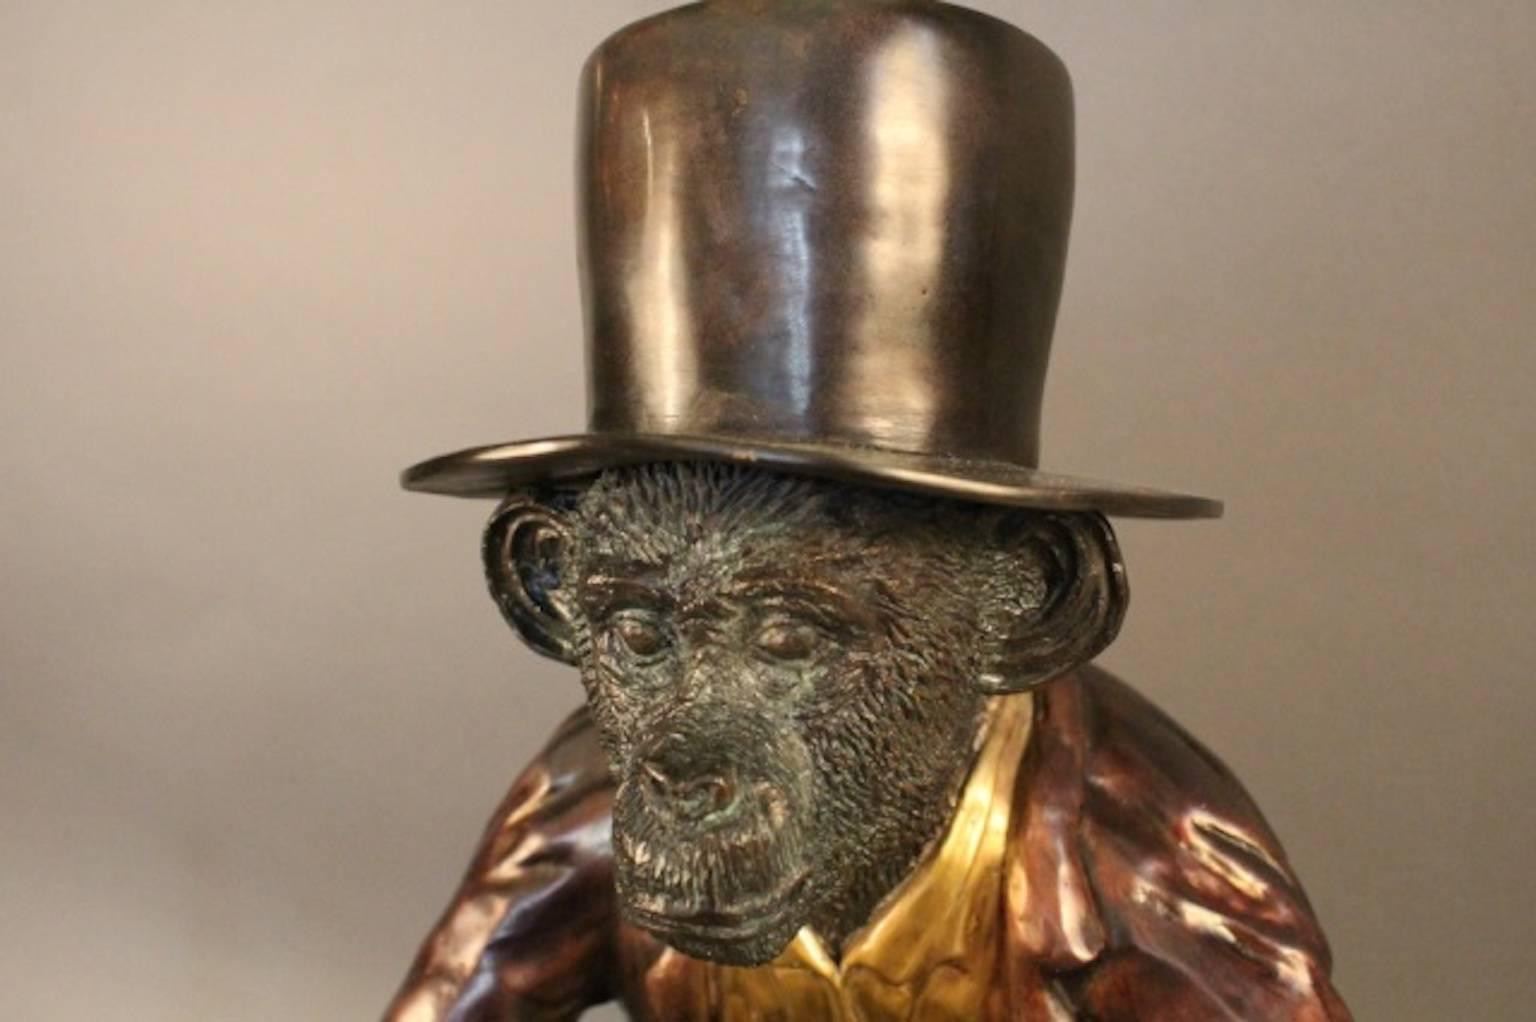 Wine cooler of cast bronze showing a monkey in top hat, topcoat, and vest holding a large ice bucket or wine cooler. Quite heavy. 
Overall dimensions: 11" L x 13" W x 24" H. 
Weight: 22 1/2lbs.